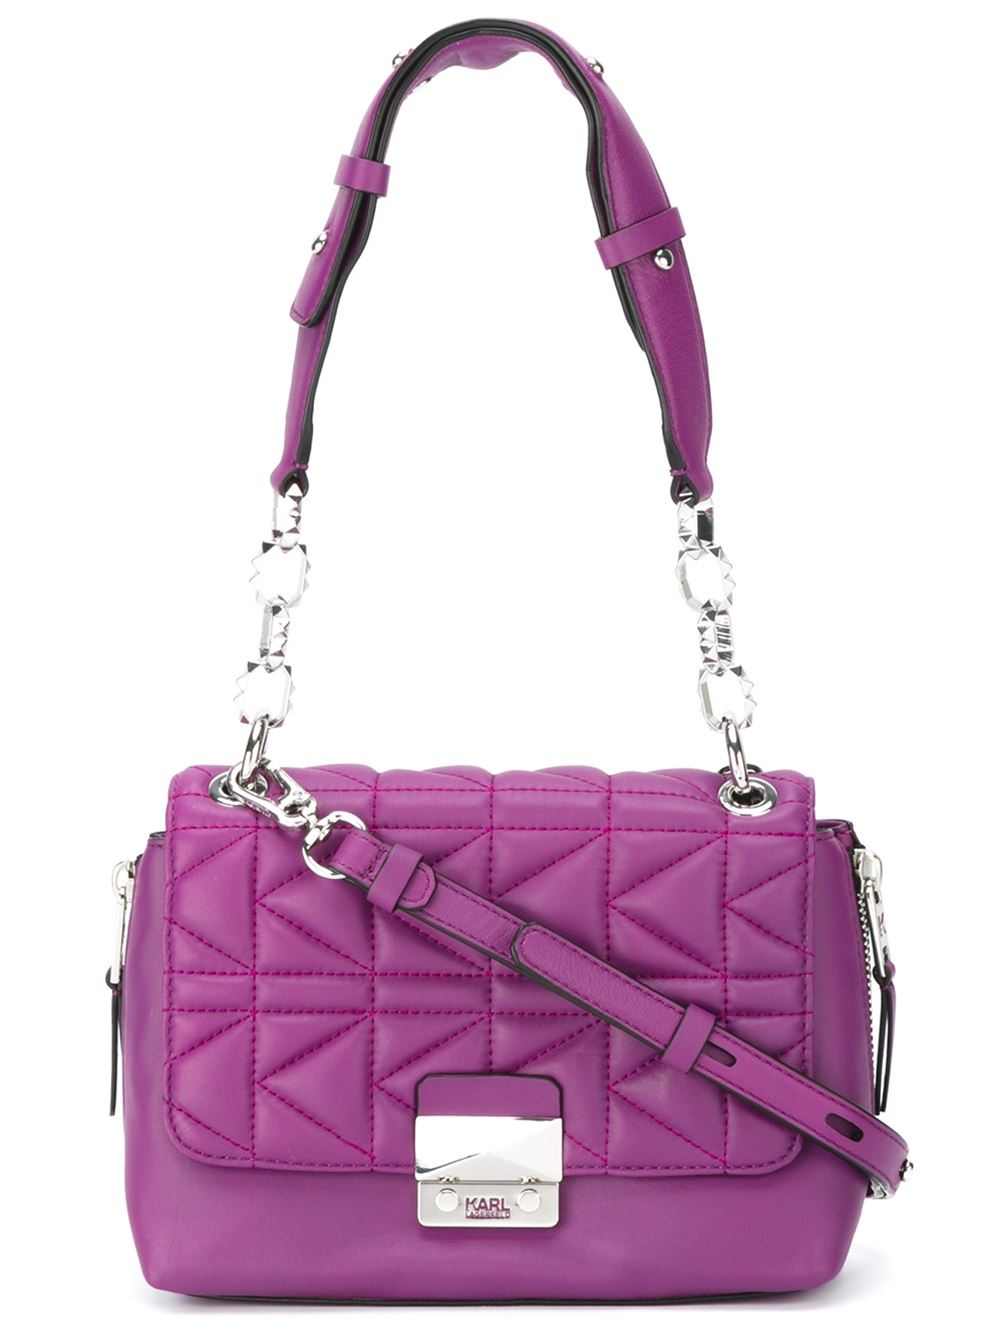 Lyst - Karl Lagerfeld Quilted Leather Shoulder Bag in Pink